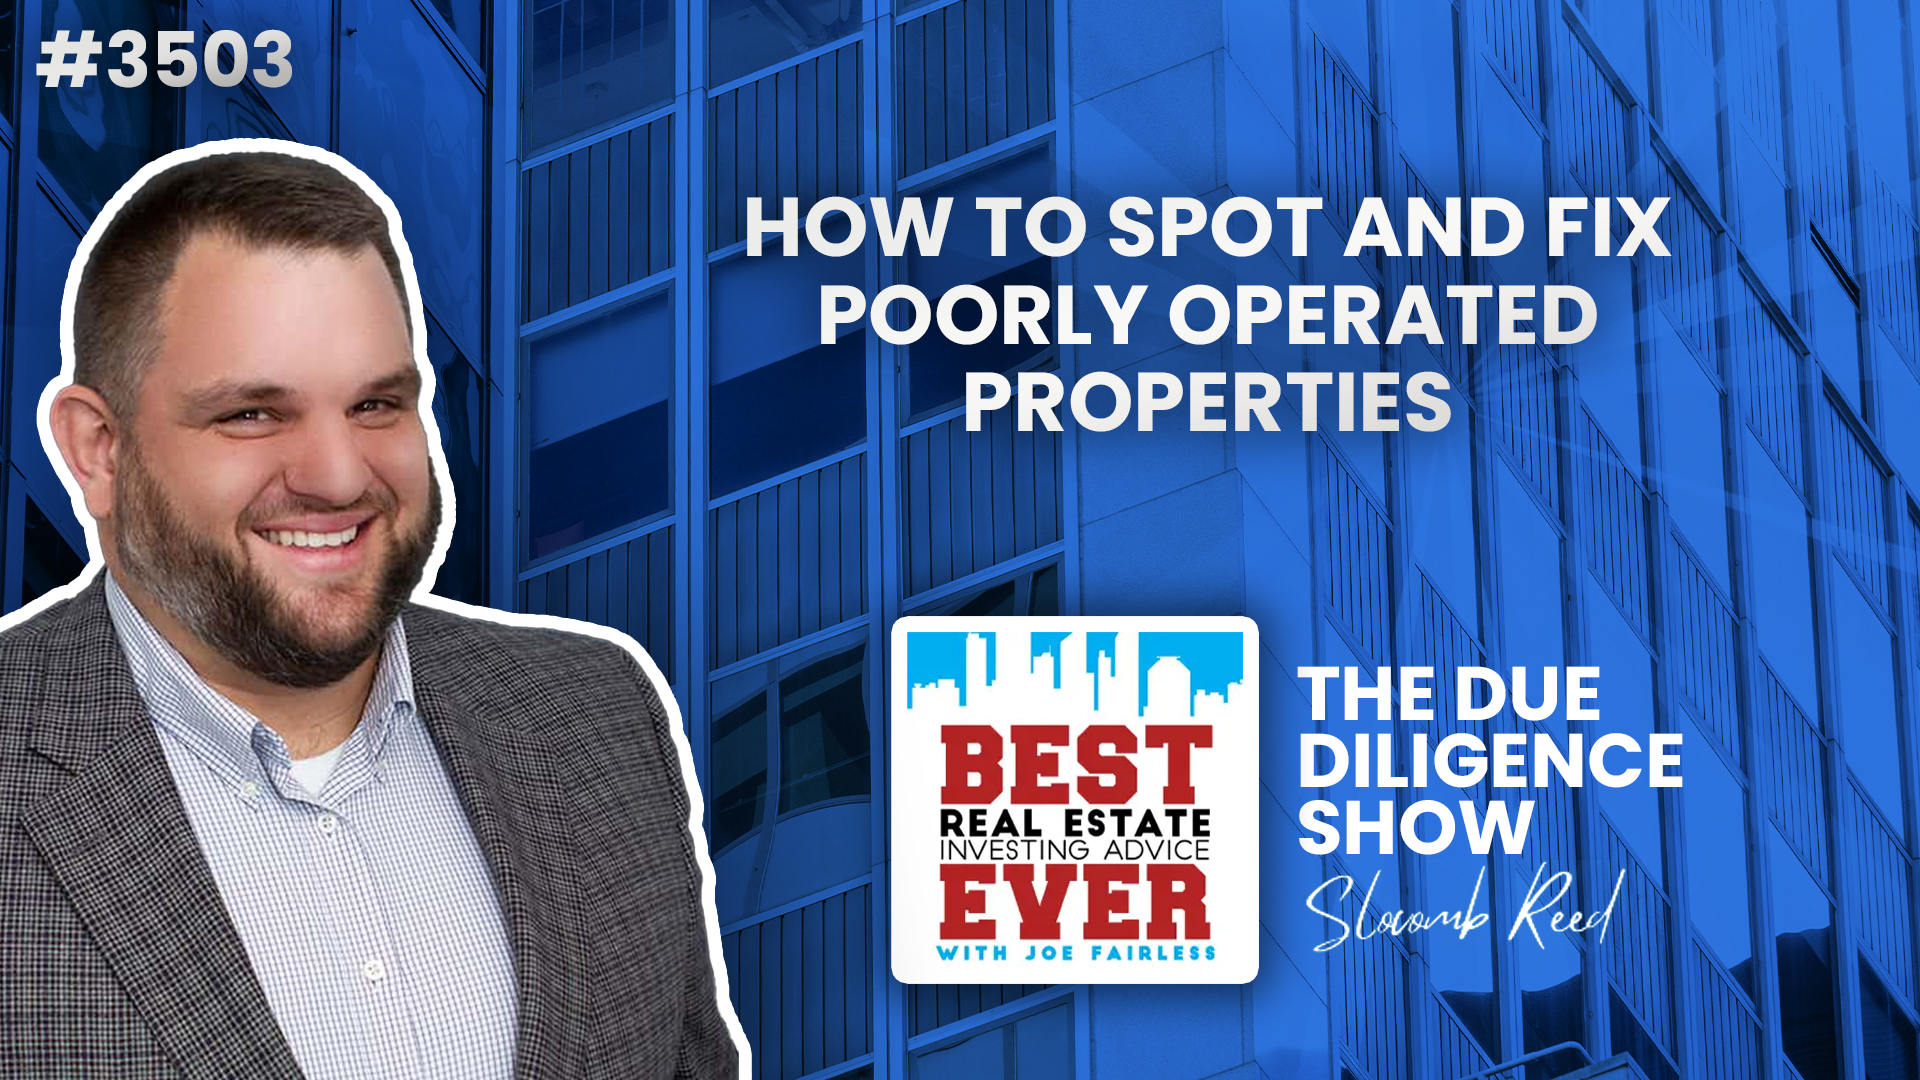 JF3503: How to Spot and Fix Poorly Operated Properties — the Due Diligence Show ft. Adrian Otto